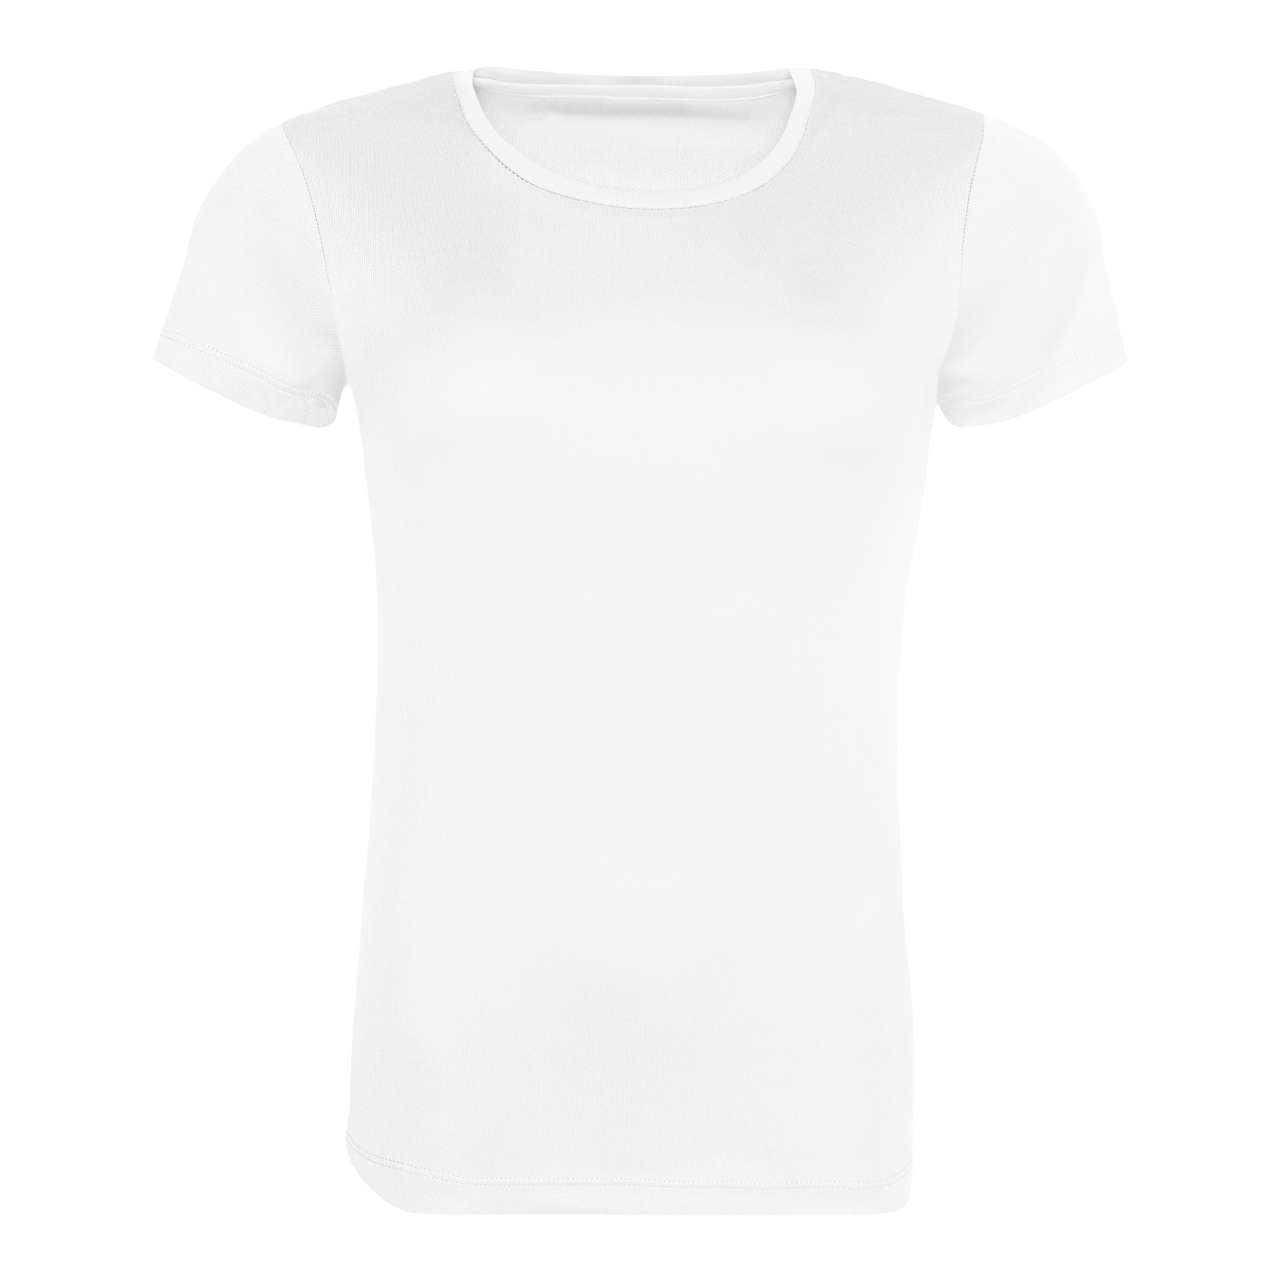 Promo  WOMEN'S RECYCLED COOL T